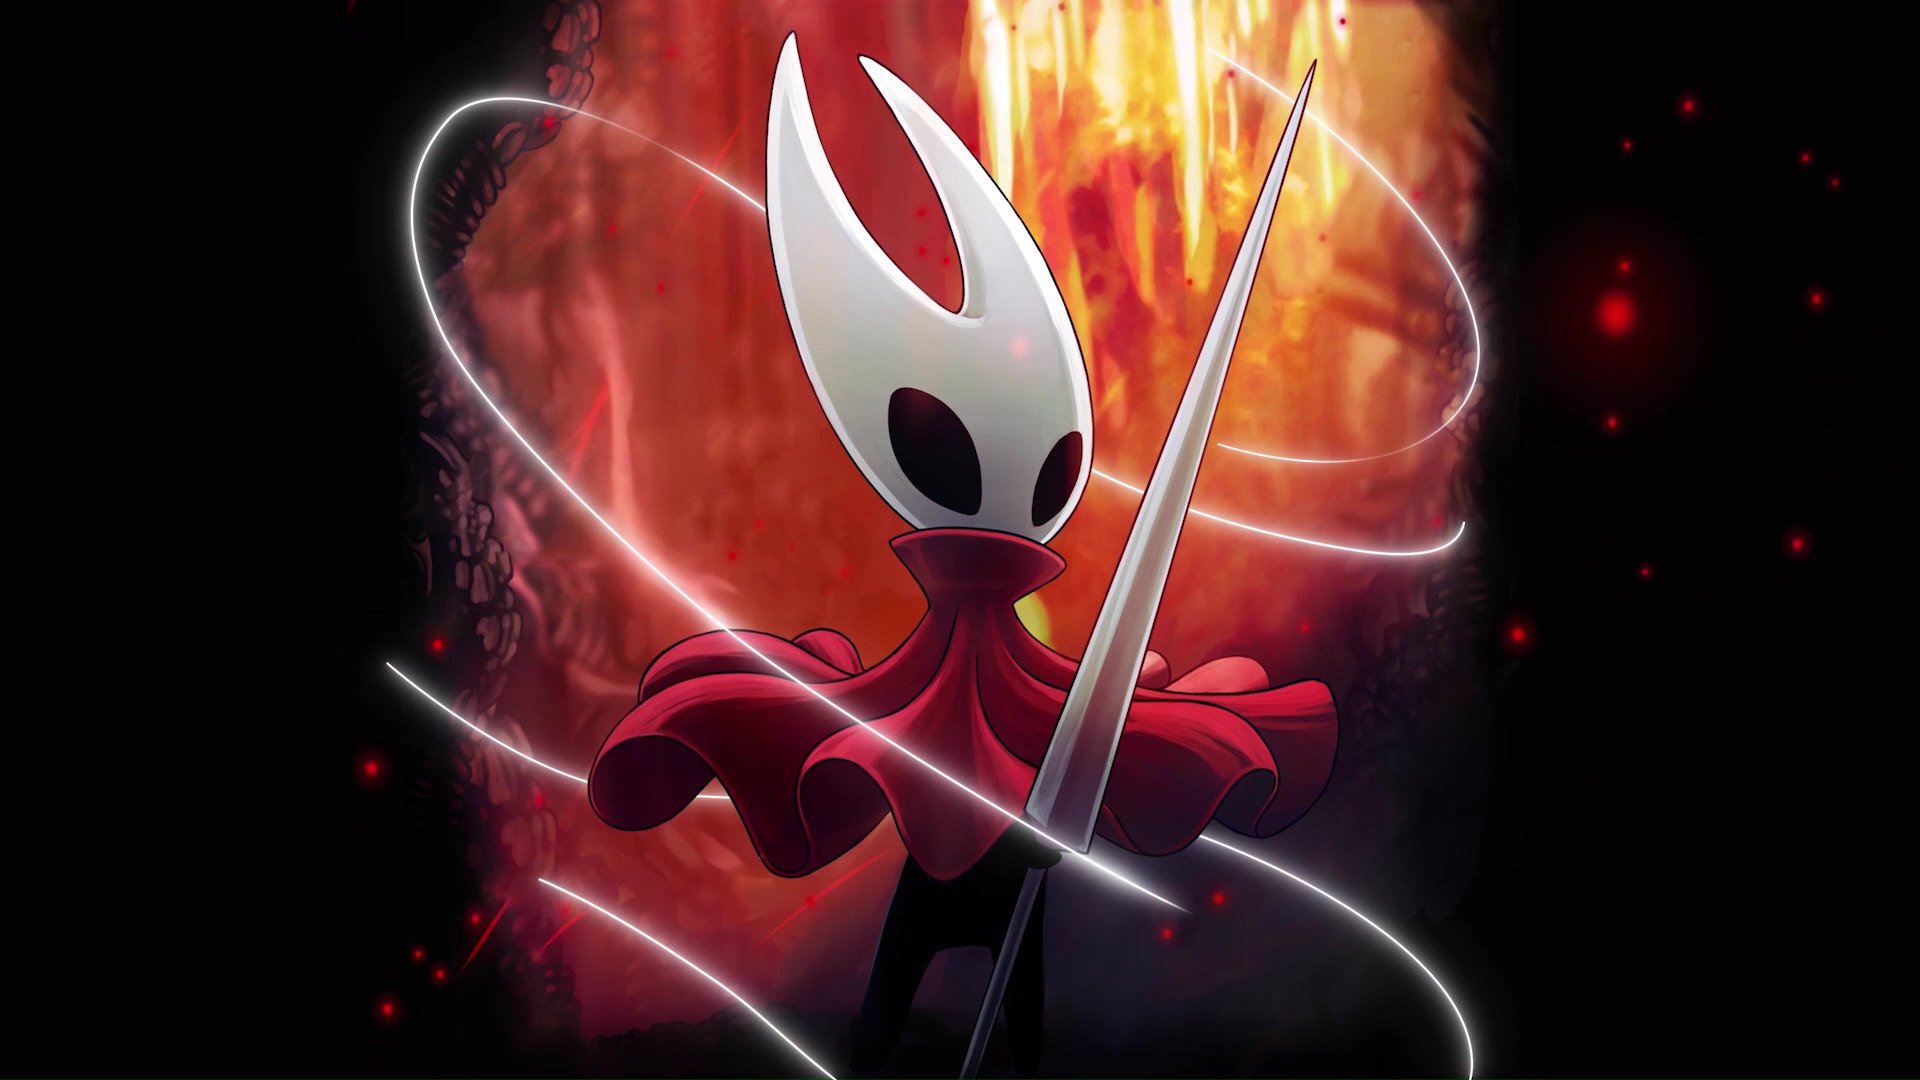 download hollow knight